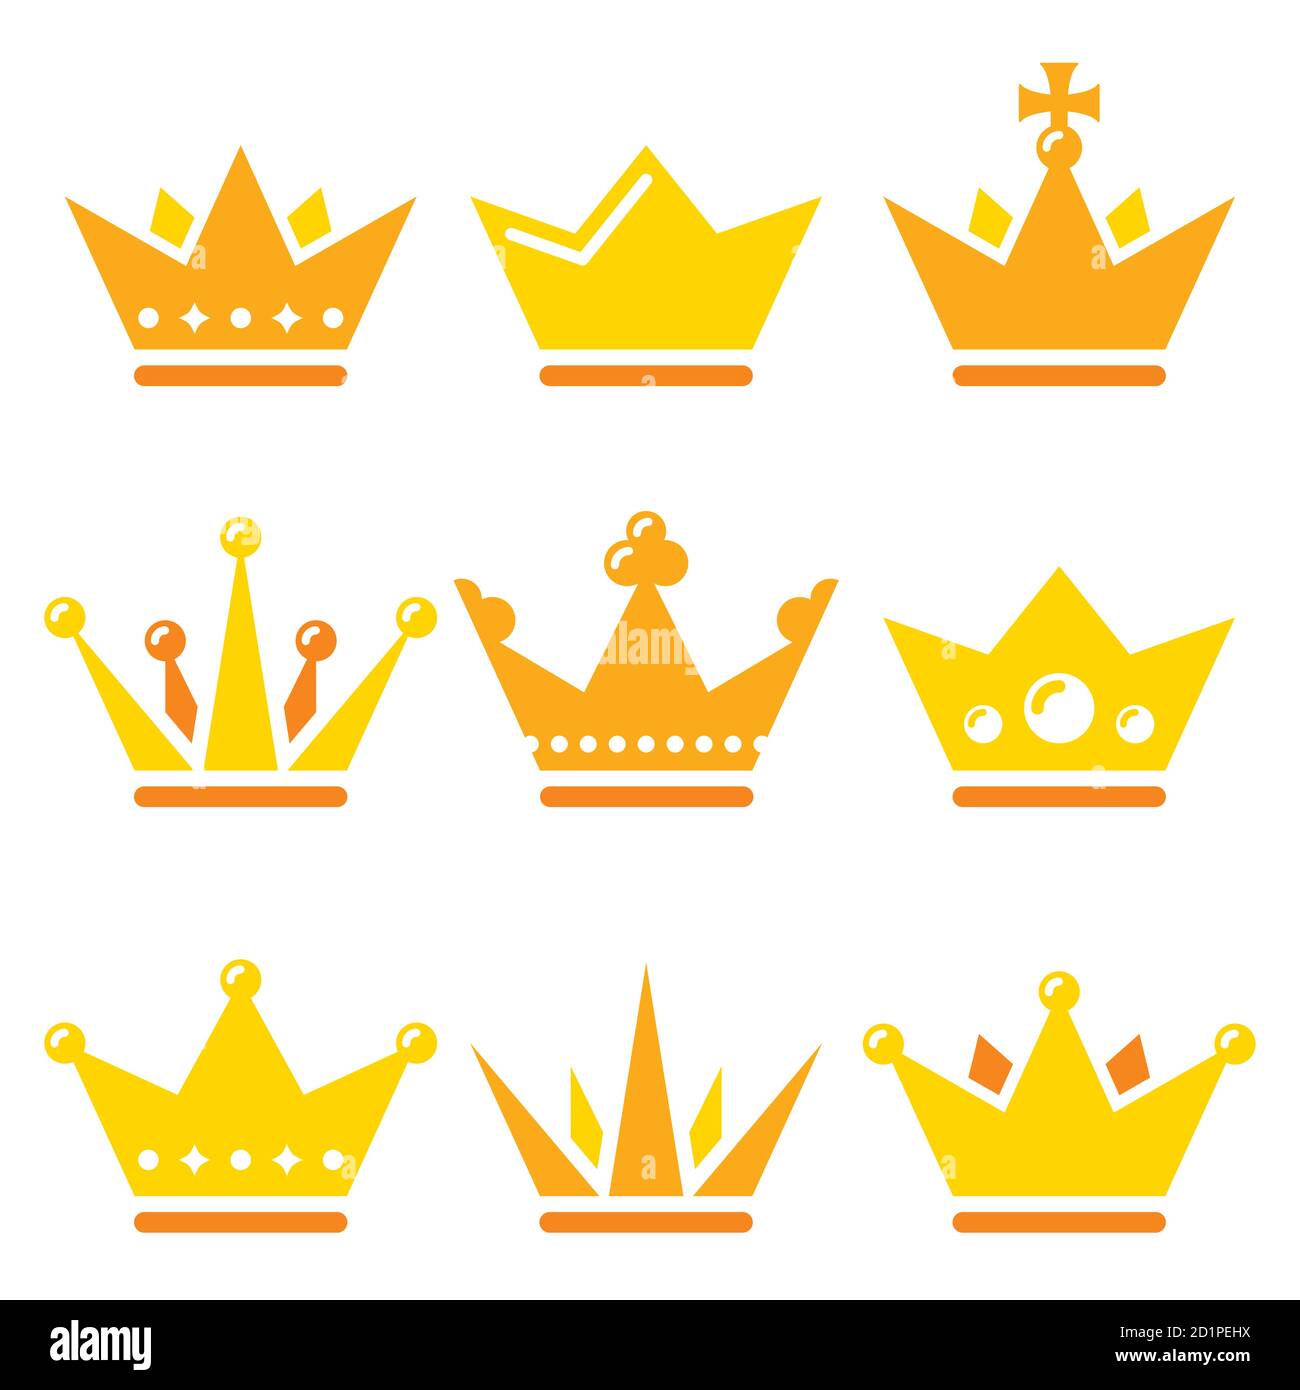 Crown, royal family vector icons set - design in gold color isolated on white Stock Vector